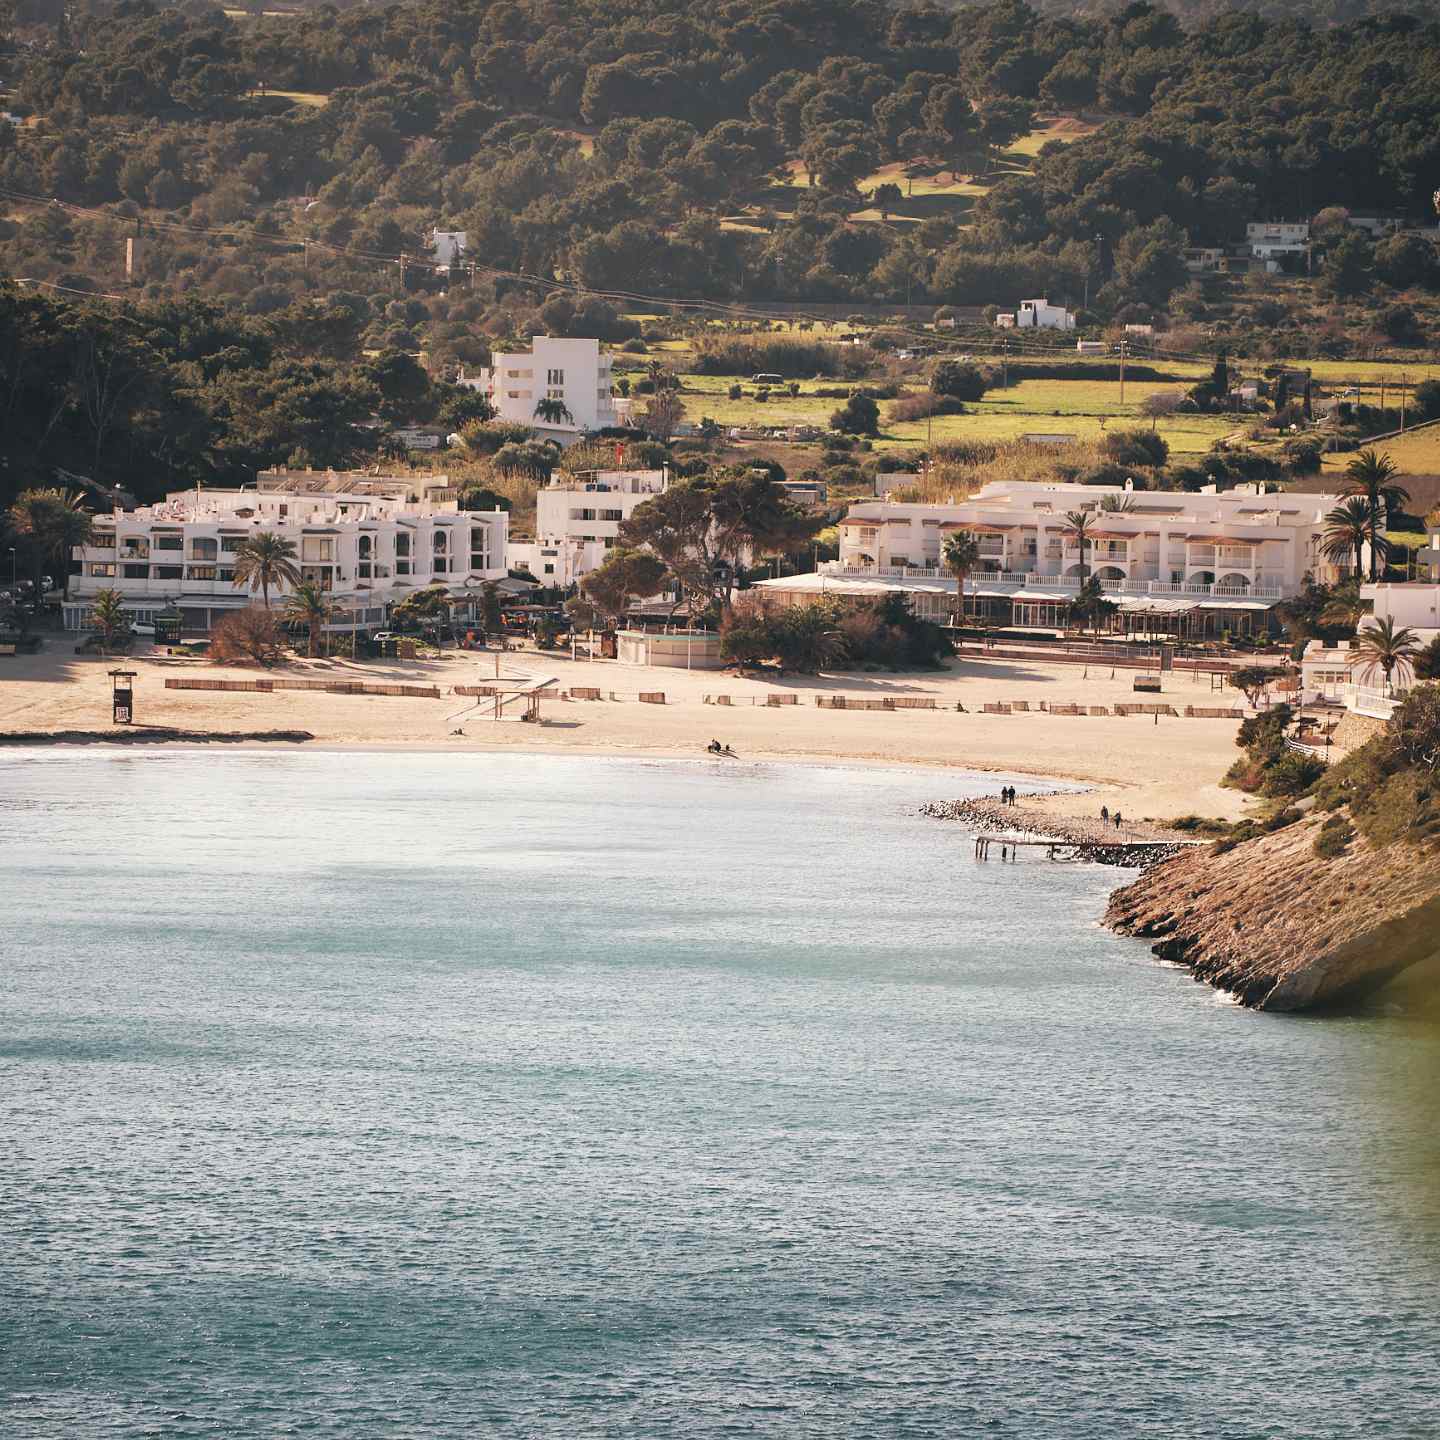 View of Cala Llonga - the beach where the hotel is located